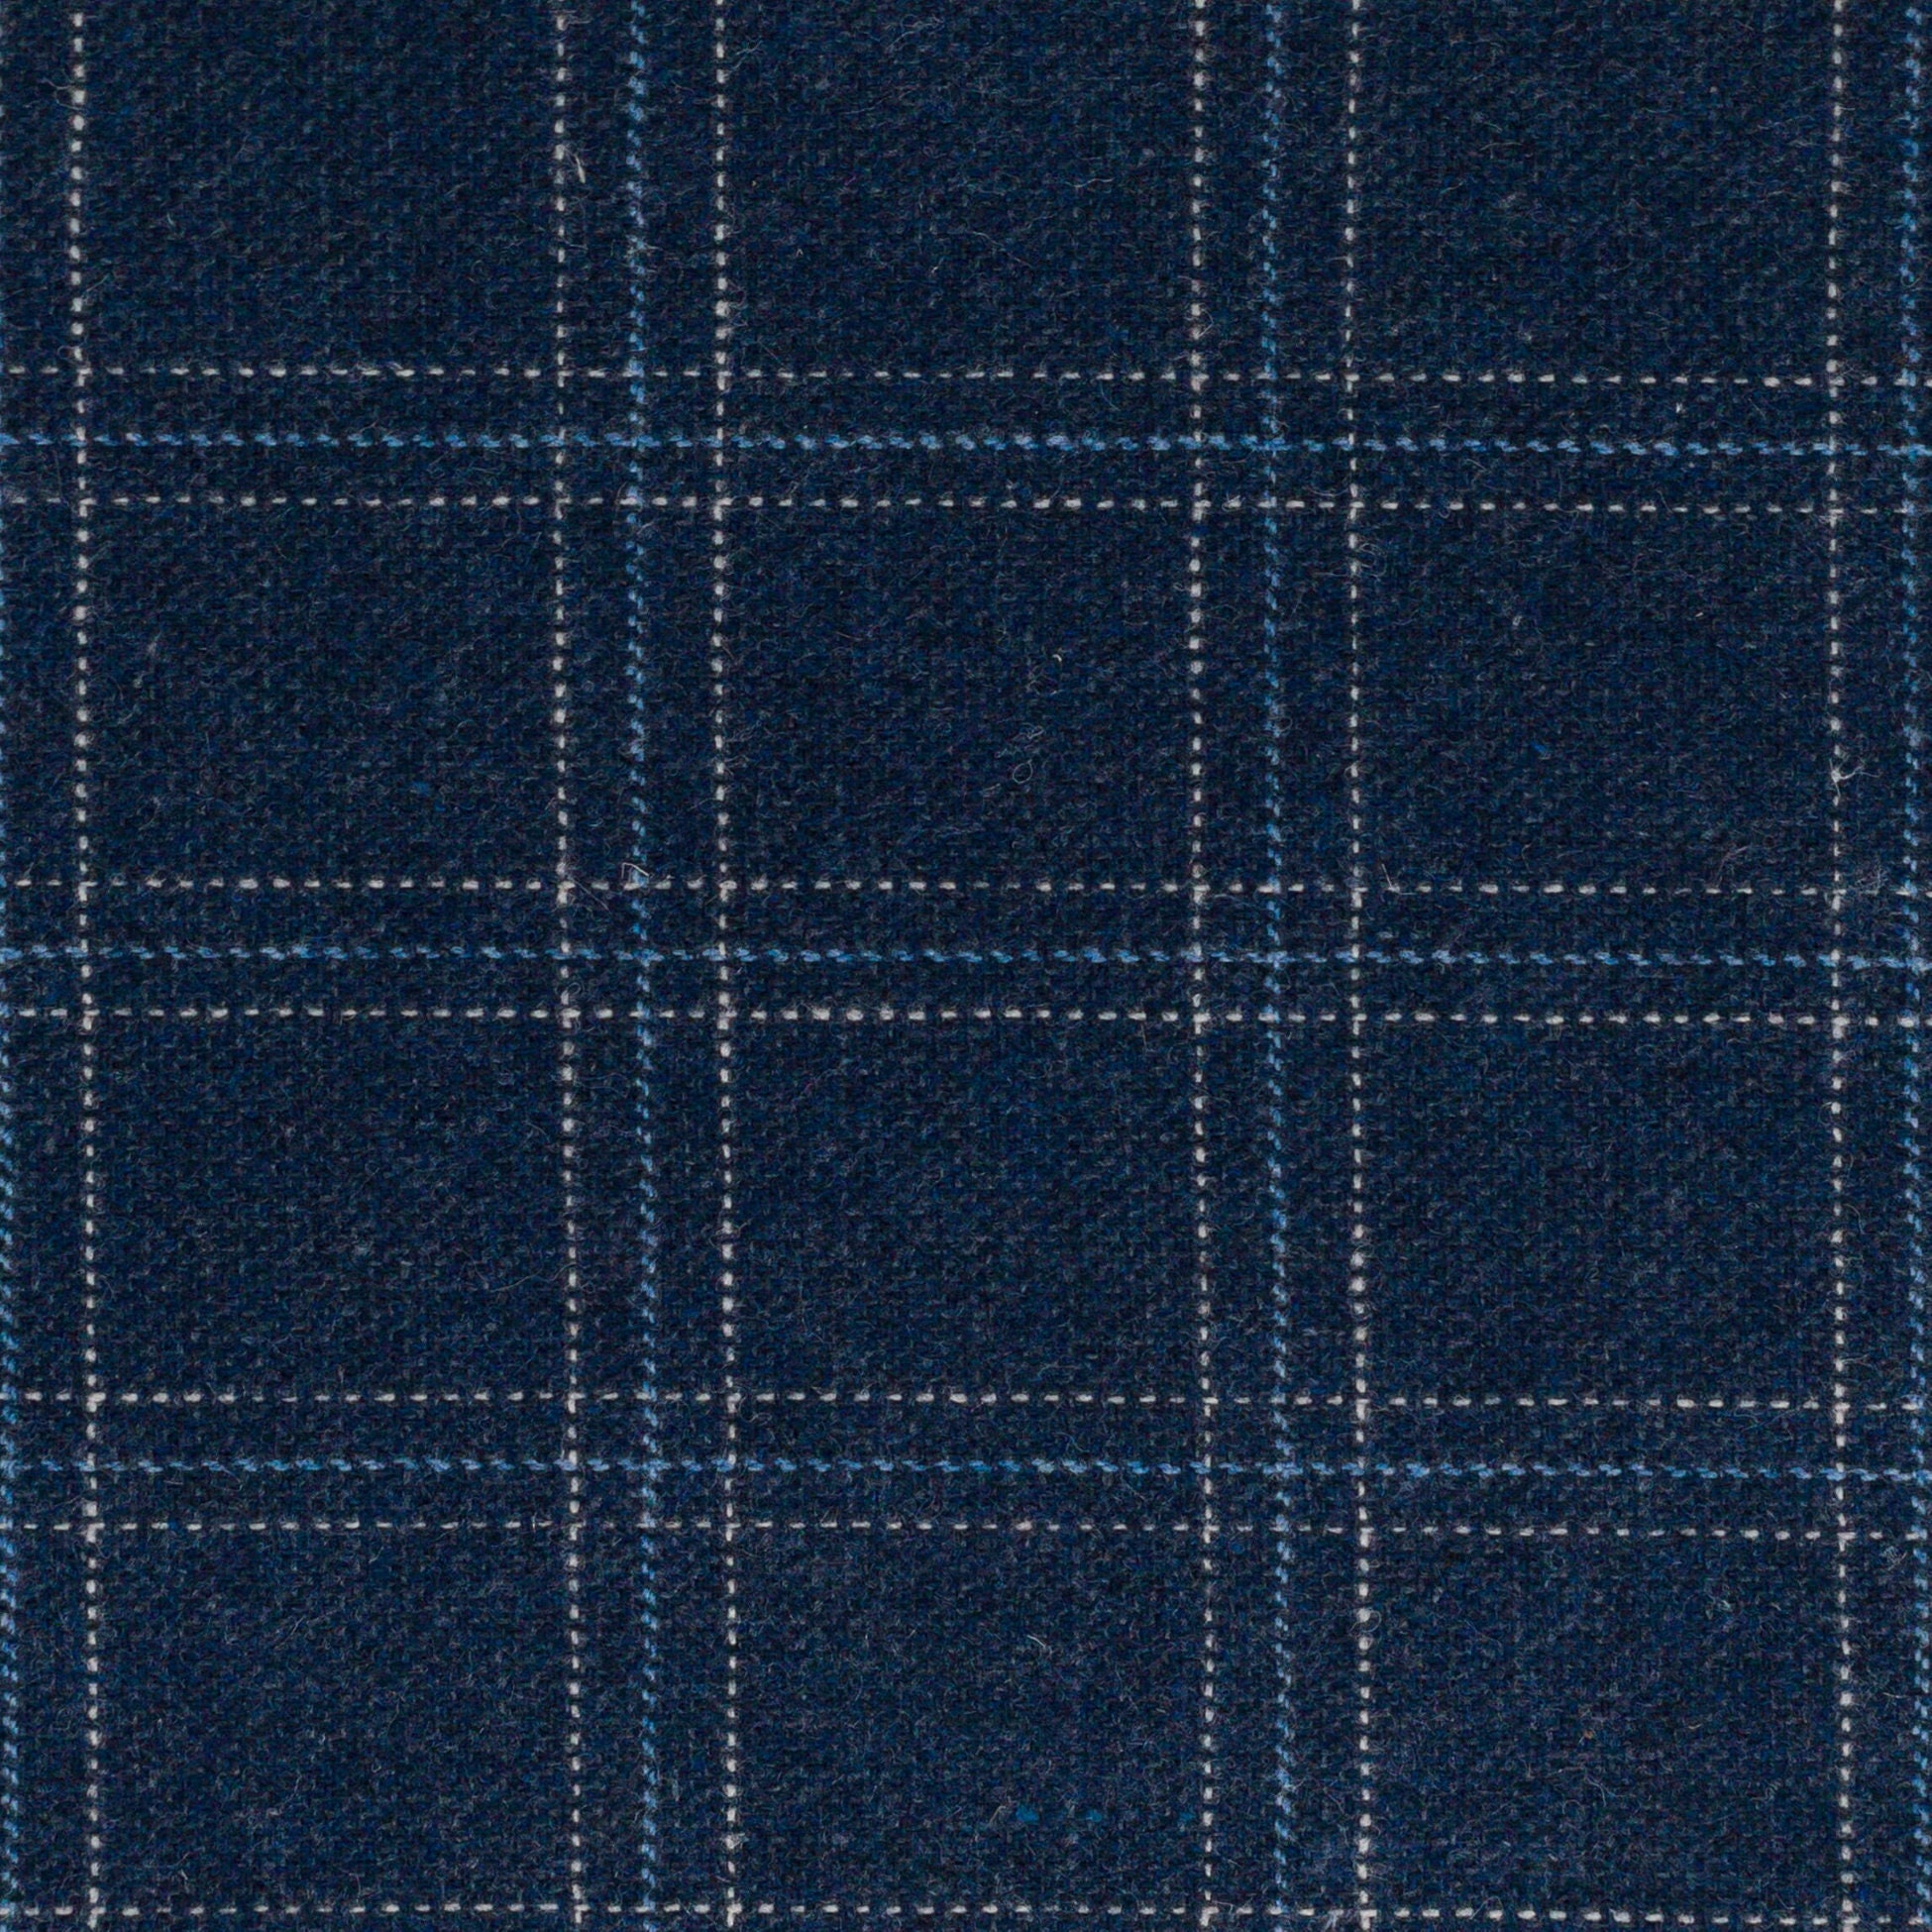 Navy Blue Plaid Upholstery Fabric for Furniture Dark Blue Wool Plaid Fabric Navy  Plaid Pillow Fabric Dark Navy Check Fabric SP 281 - Etsy